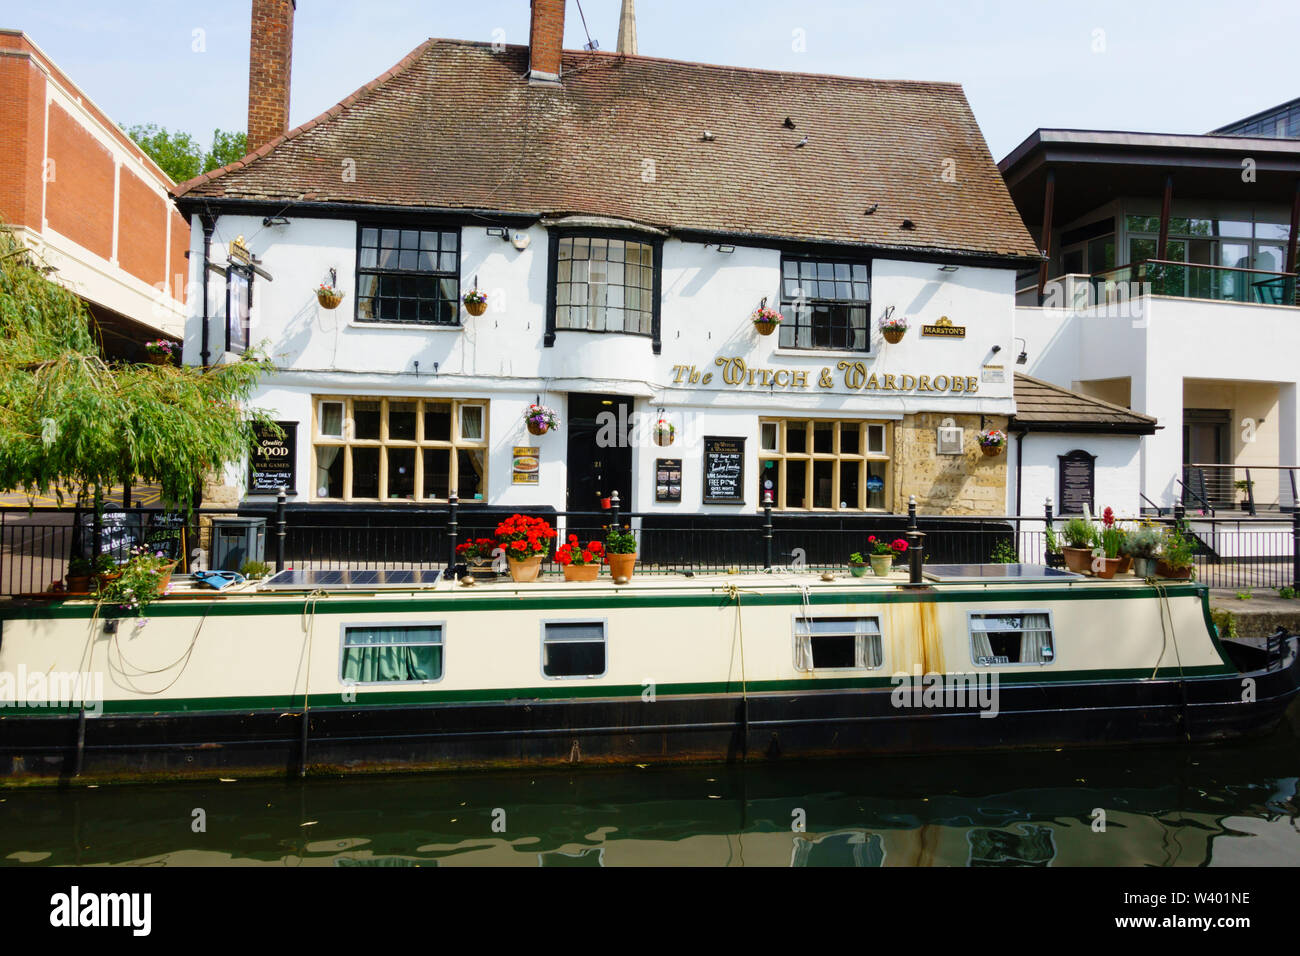 The Witch and Wardrobe public house on the River Witham, Lincoln, Lincolnshire, England. July 2019 Stock Photo